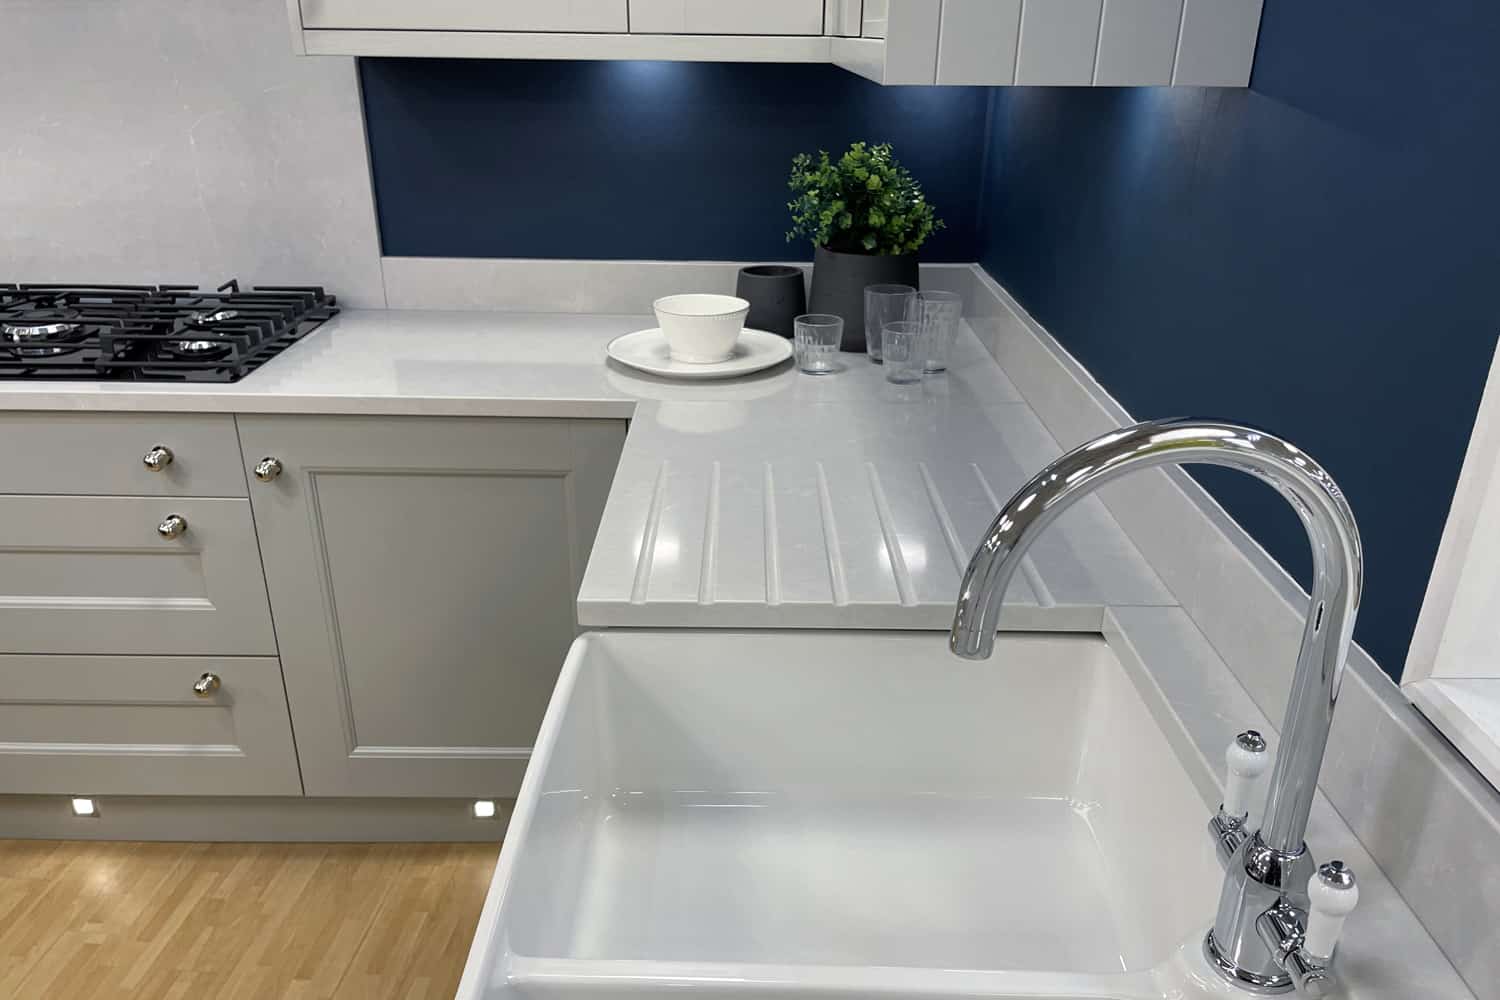 Stock photo showing a ceramic, double kitchen butler sink and white stone, corian kitchen counter with integrated grooved granite draining board.